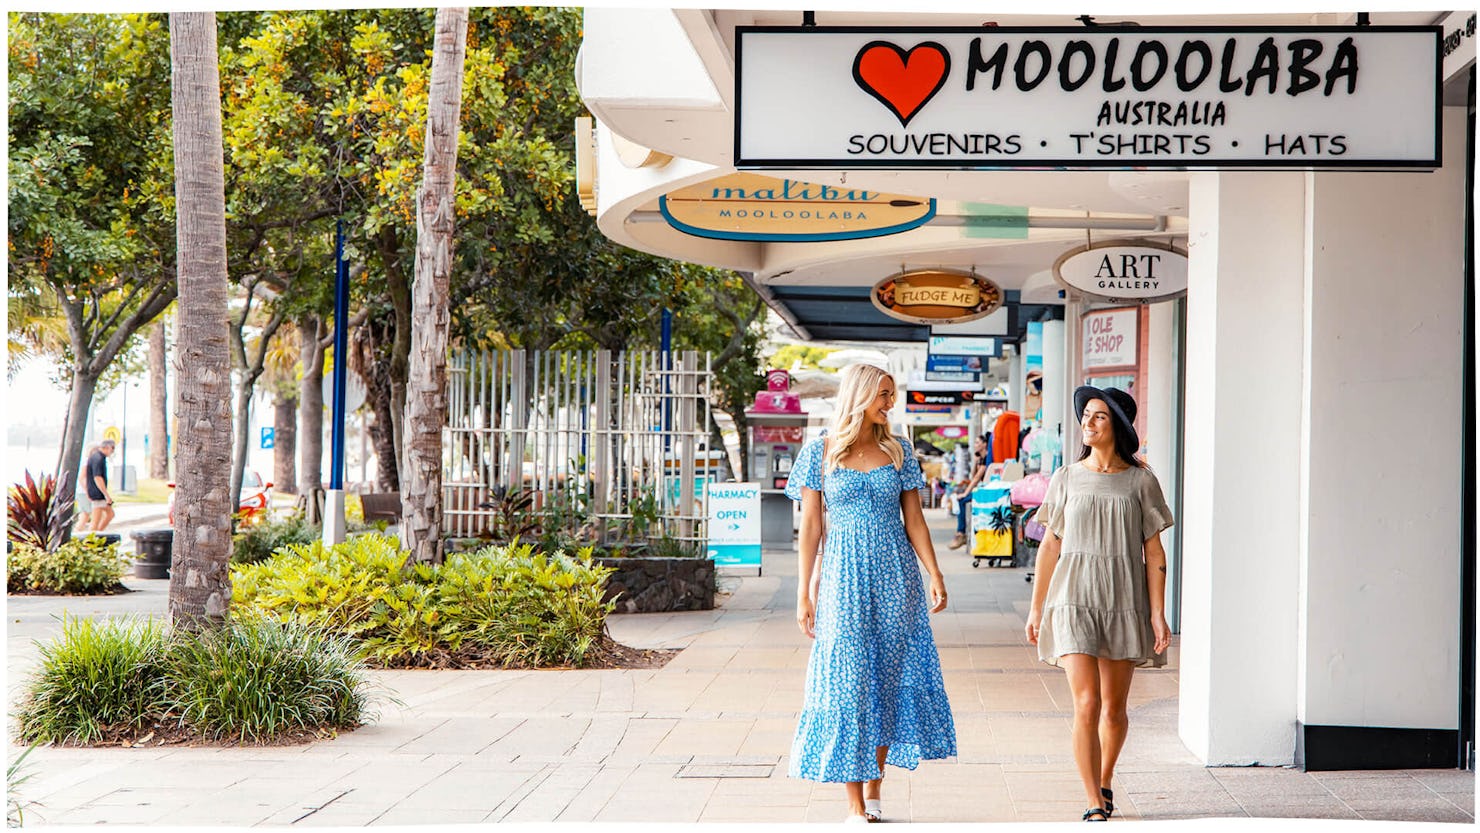 Top things to do in Mooloolaba besides swimming